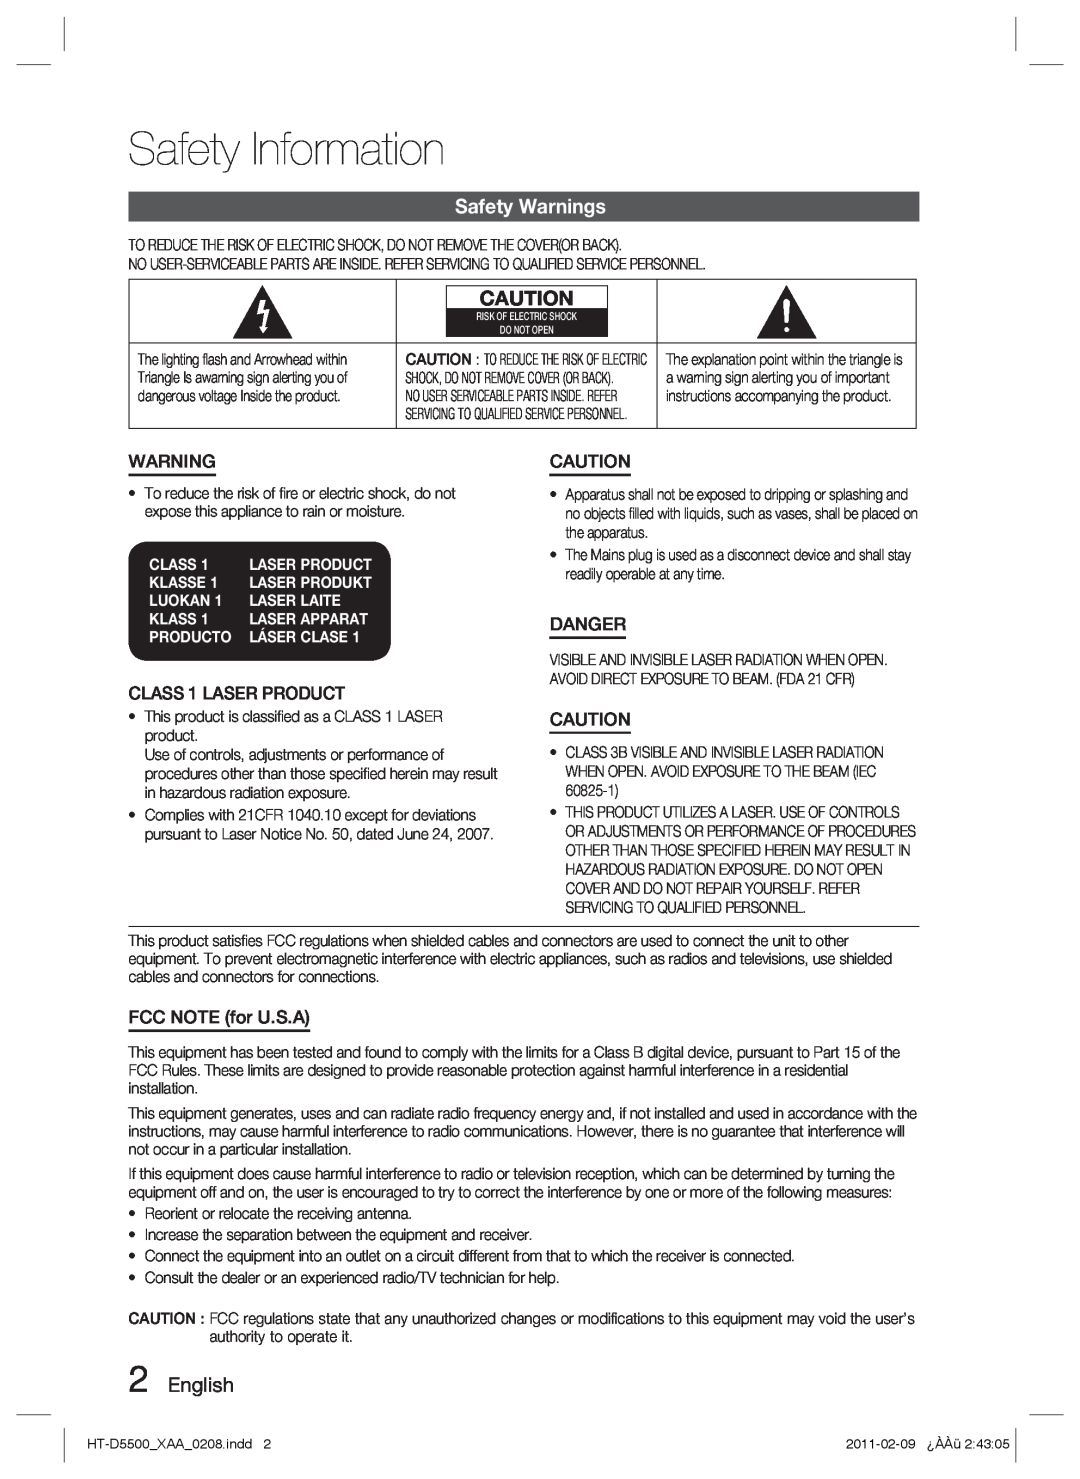 Samsung D5500 user manual Safety Information, Safety Warnings, Class, Klasse, Luokan, Laser Laite, Laser Apparat, Producto 